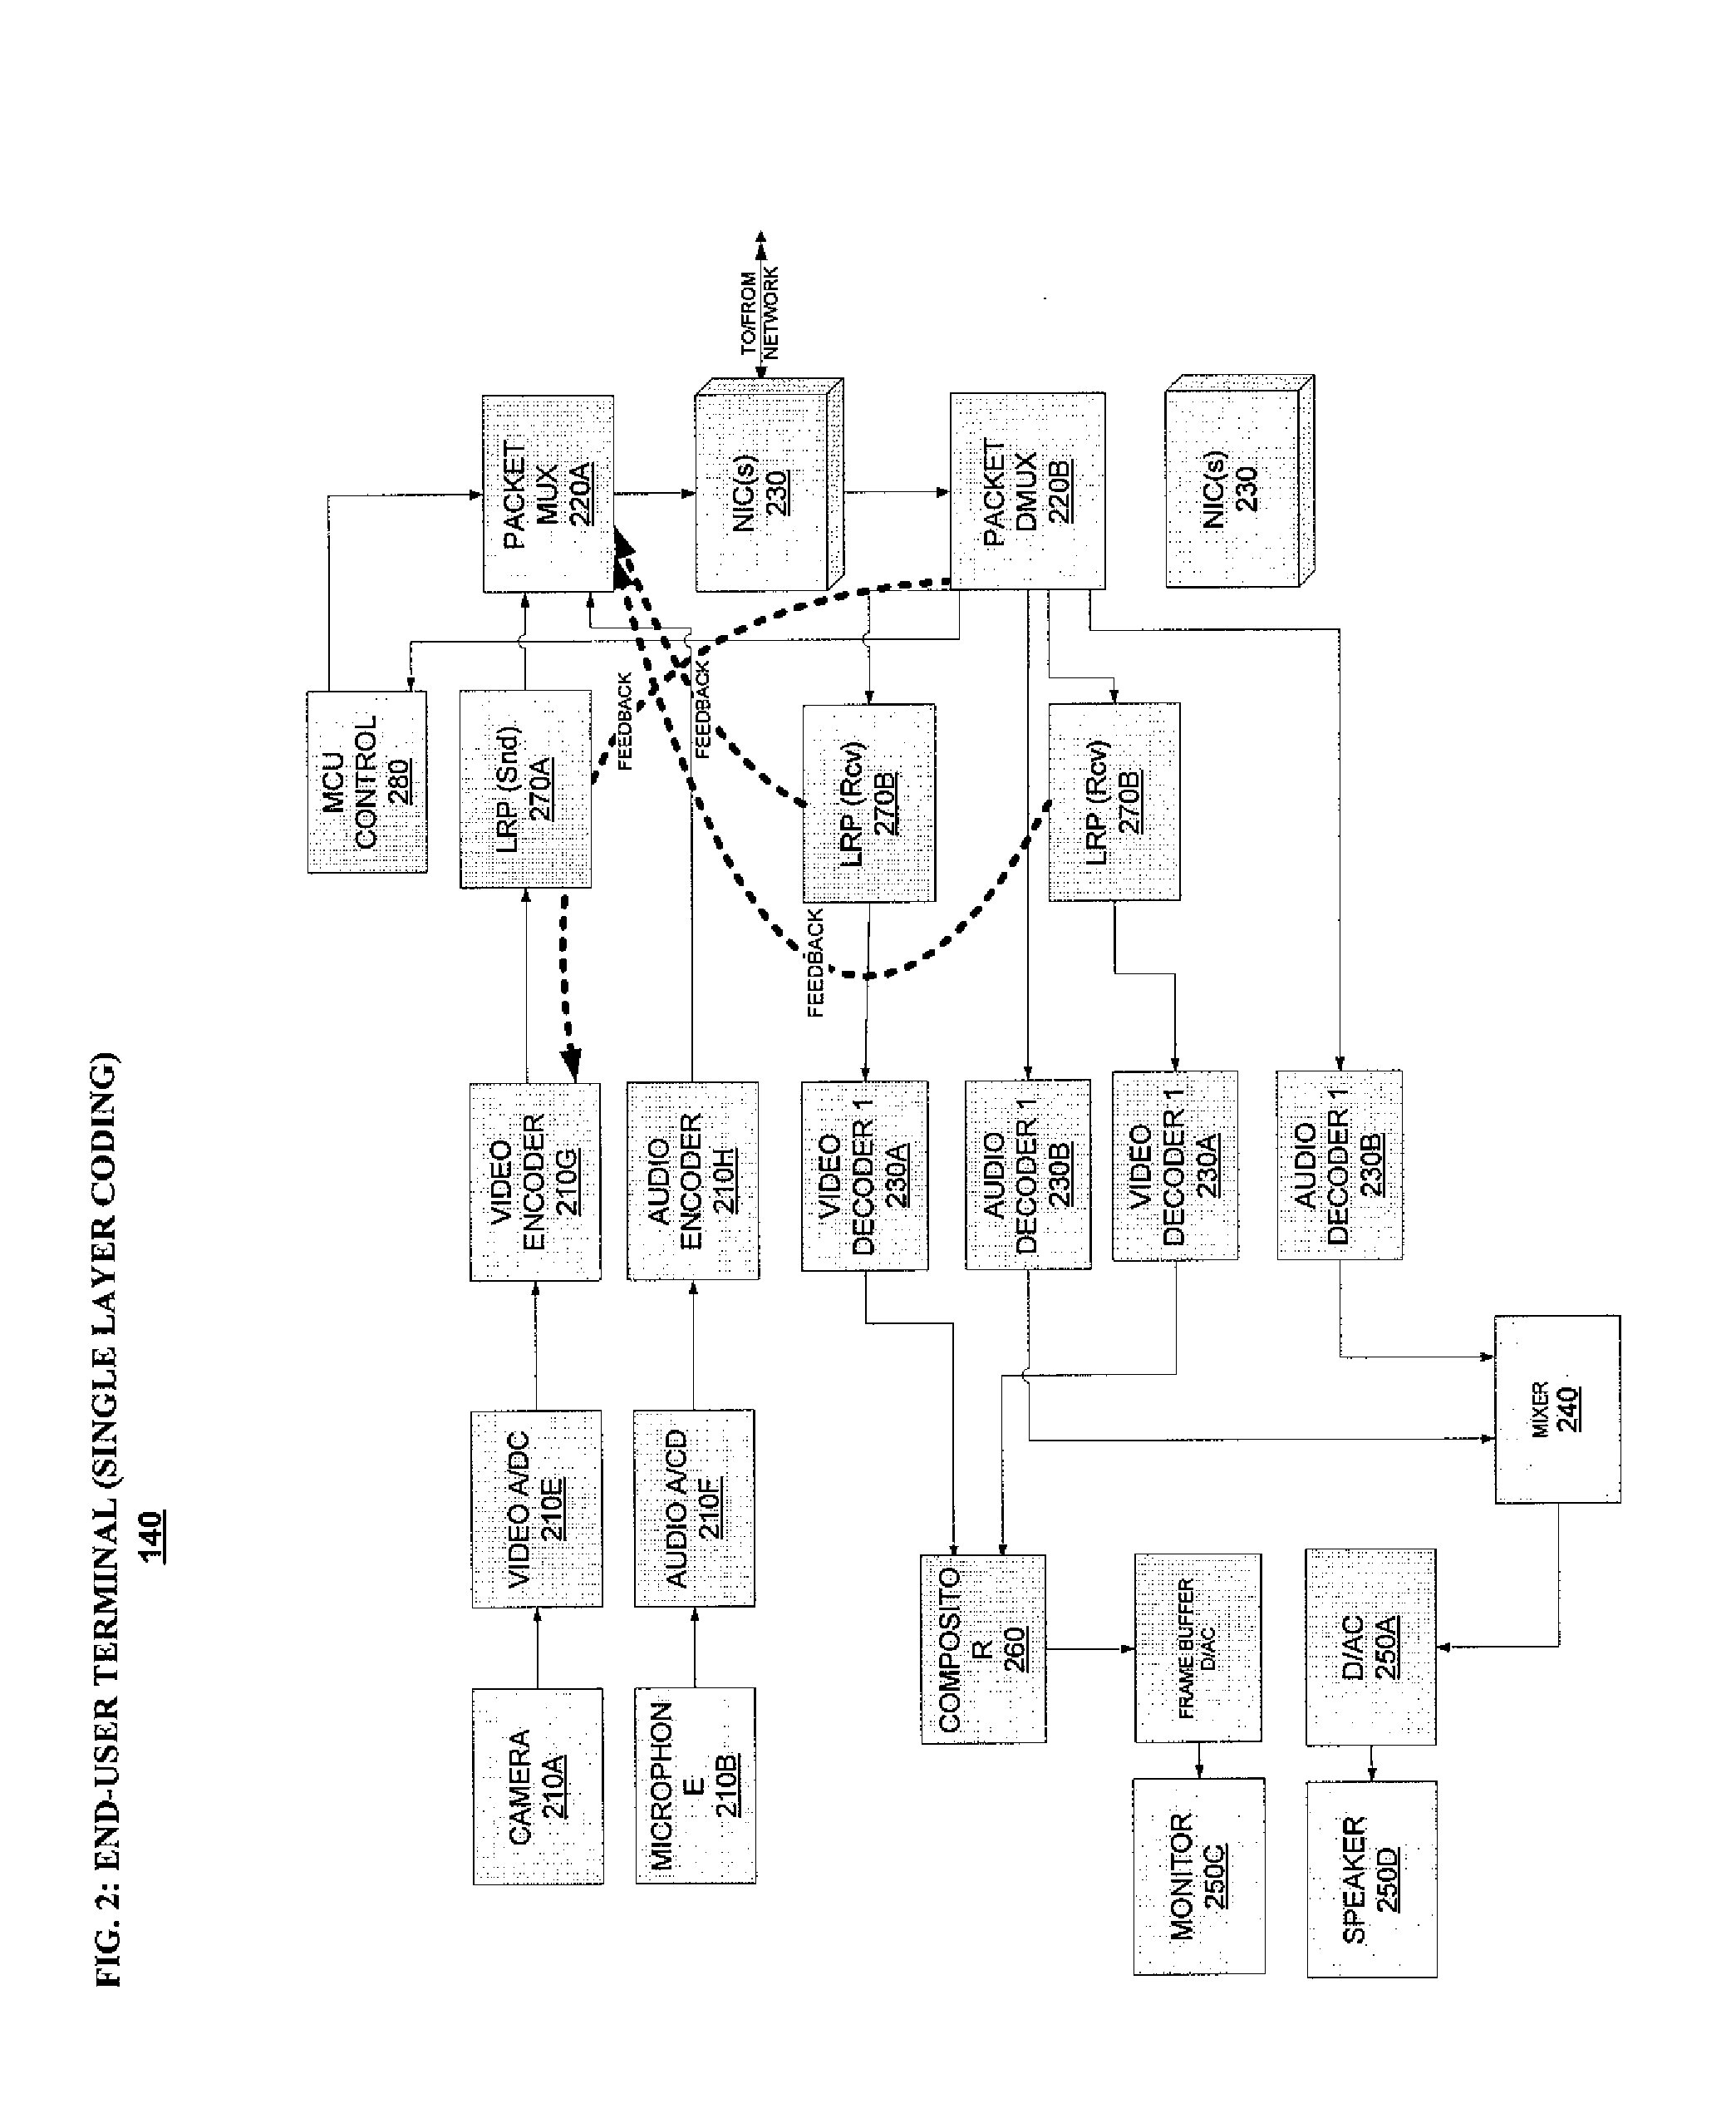 Systems and methods for error resilience and random access in video communication systems